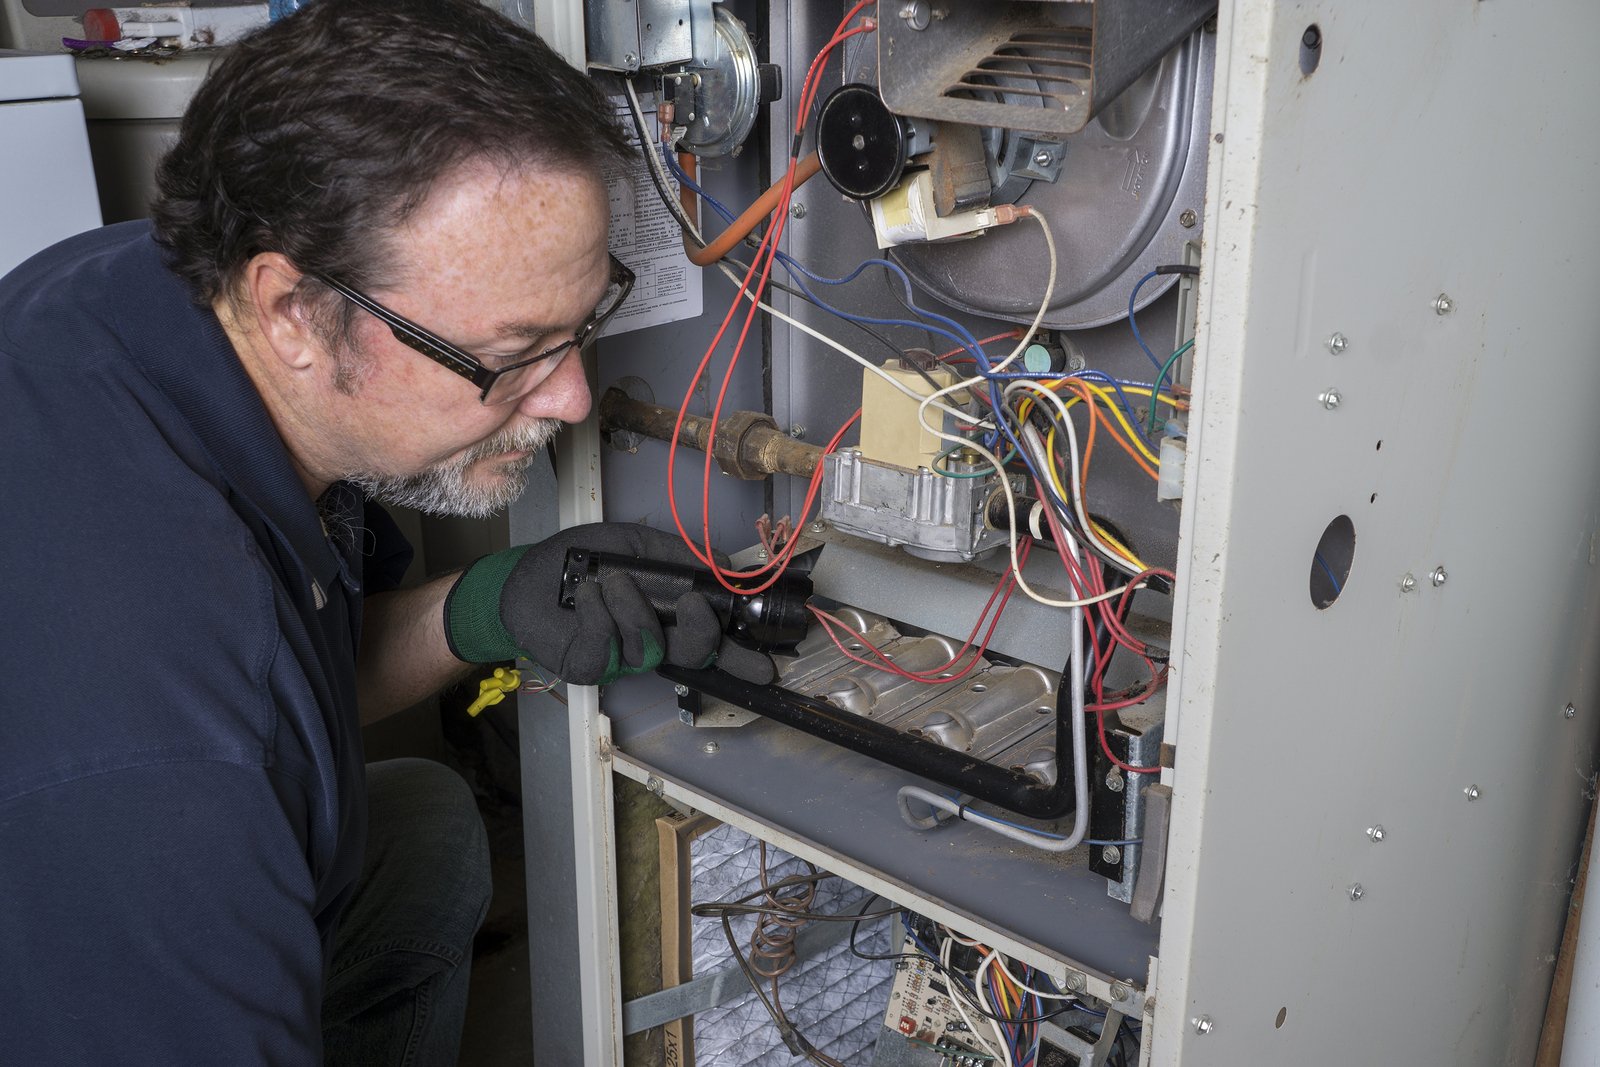 furnace repairs in the quad cities